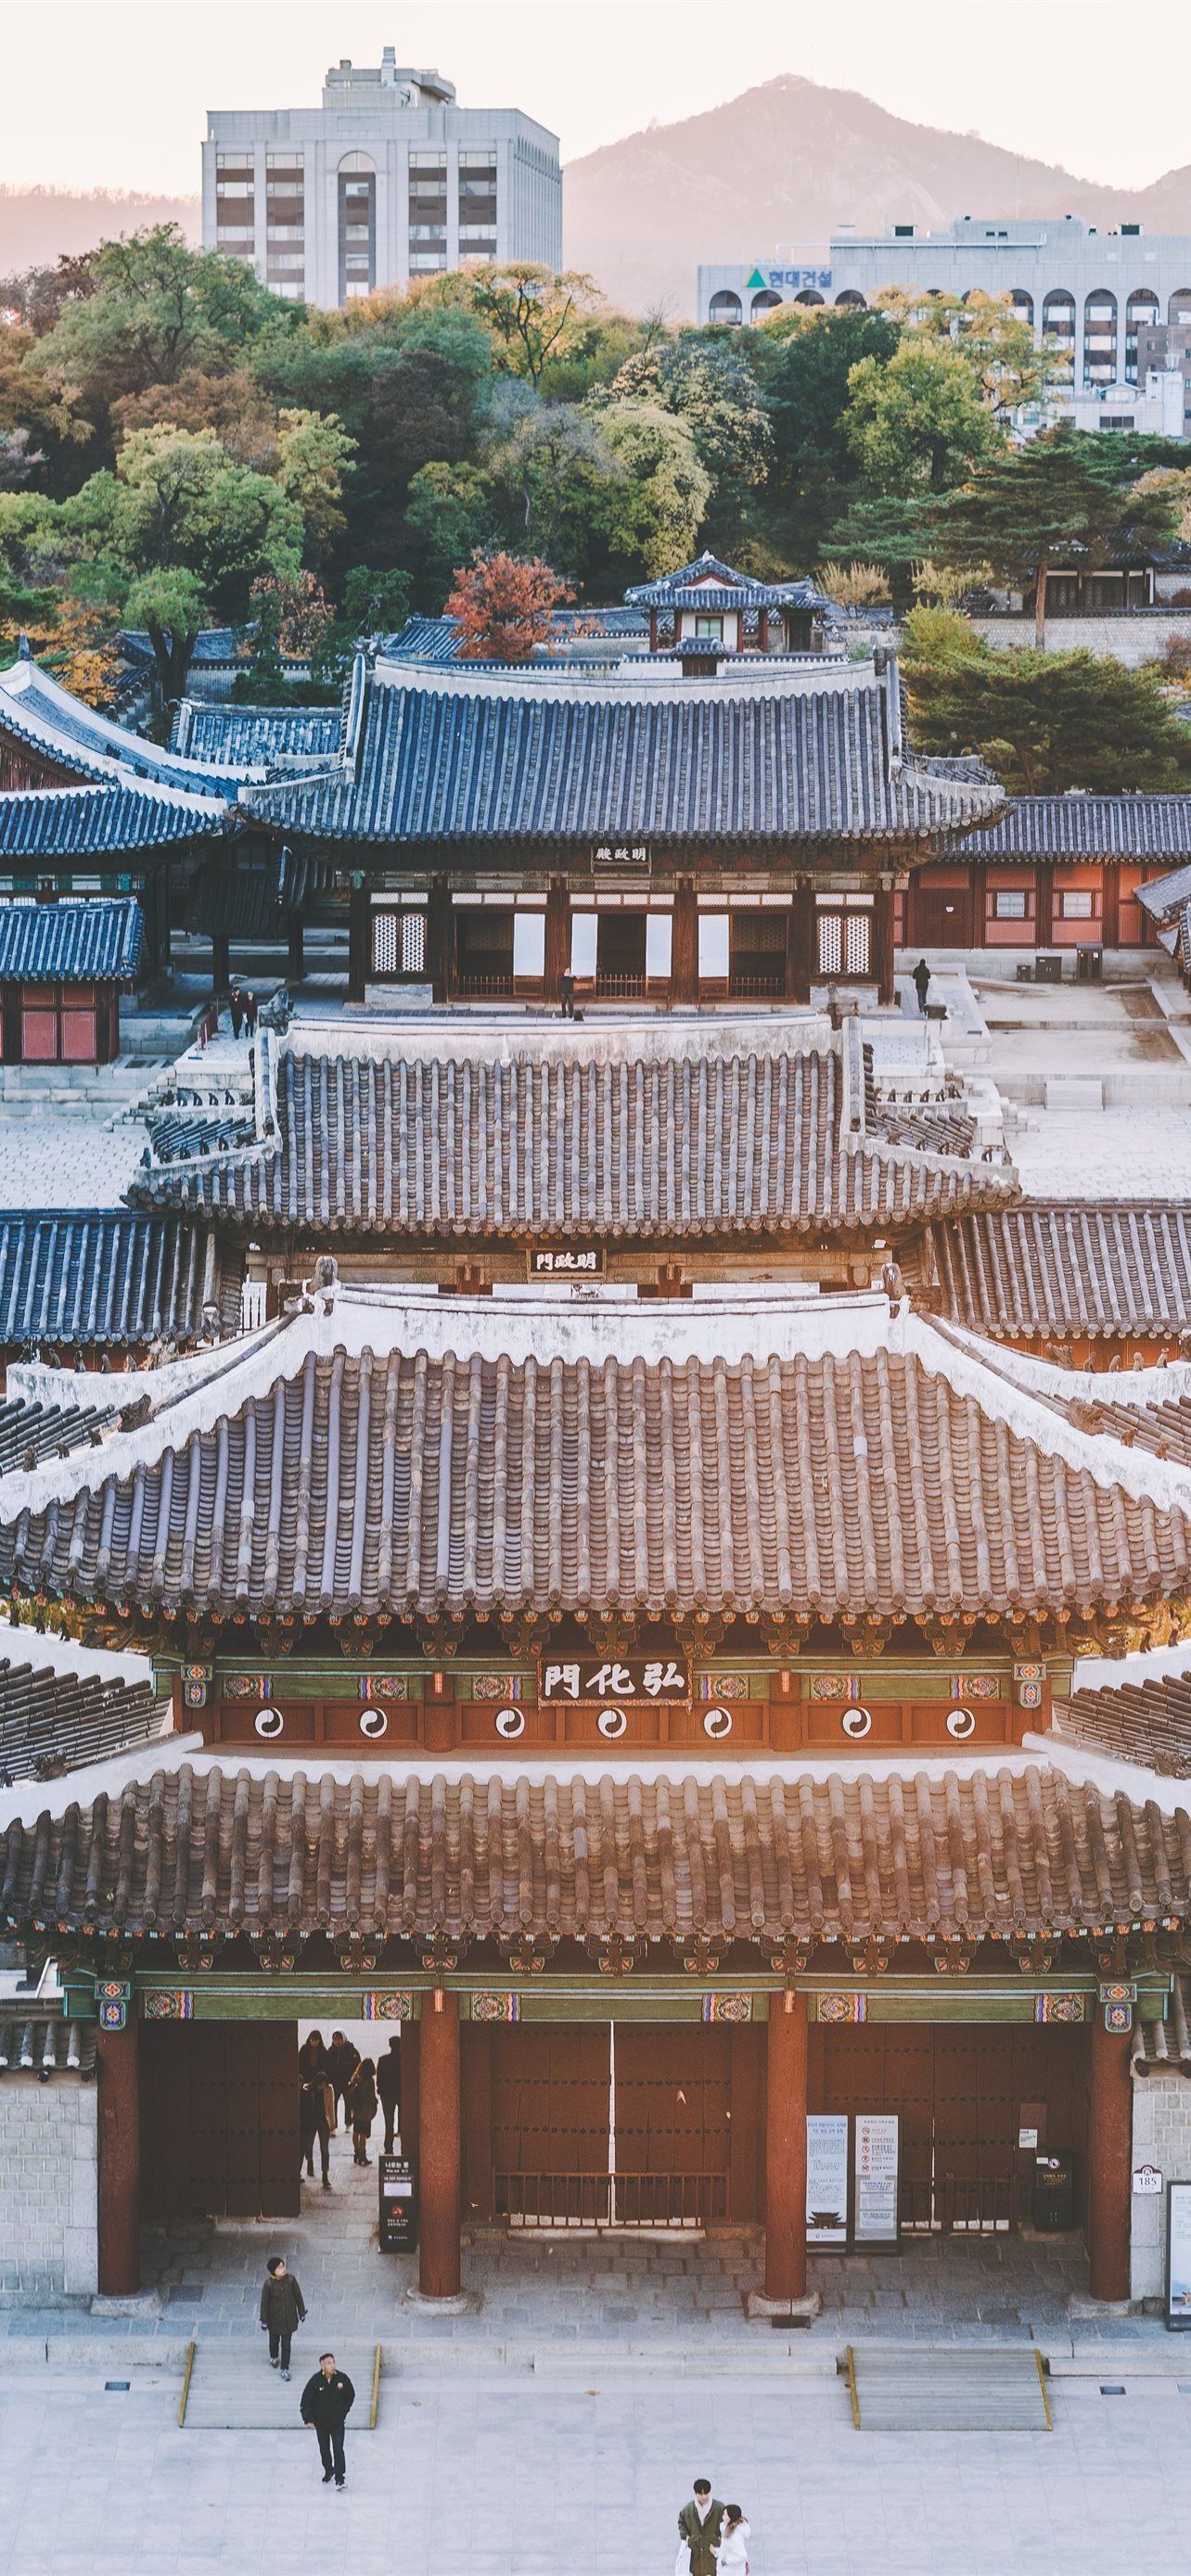 A traditional Korean building with a red roof and people walking around it. - Seoul